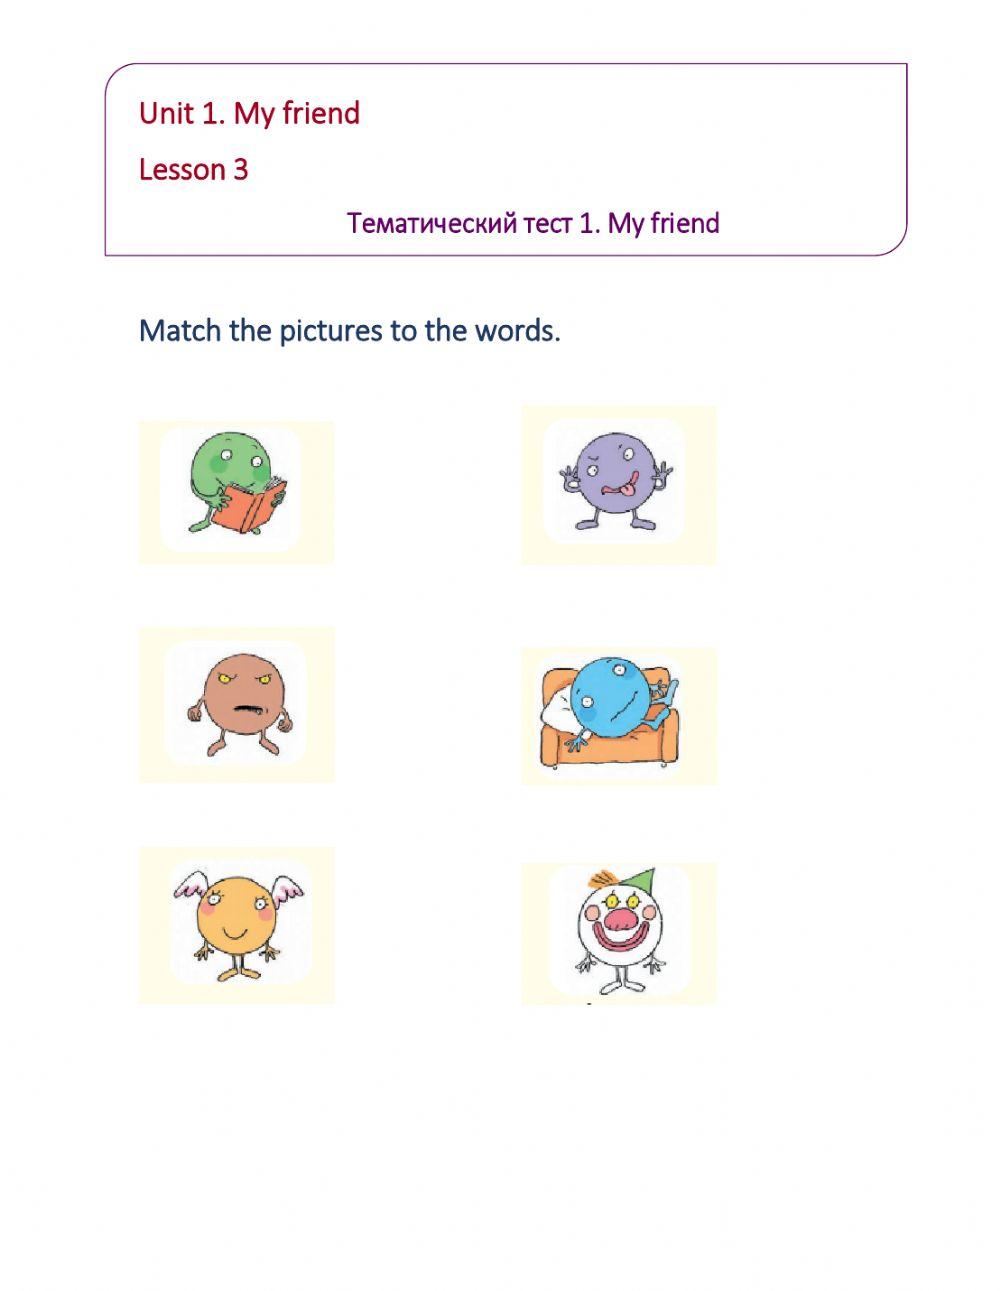 English-4-Unit 1-Lesson 3 Тематический тест 1 «My friend». Match the pictures to the words